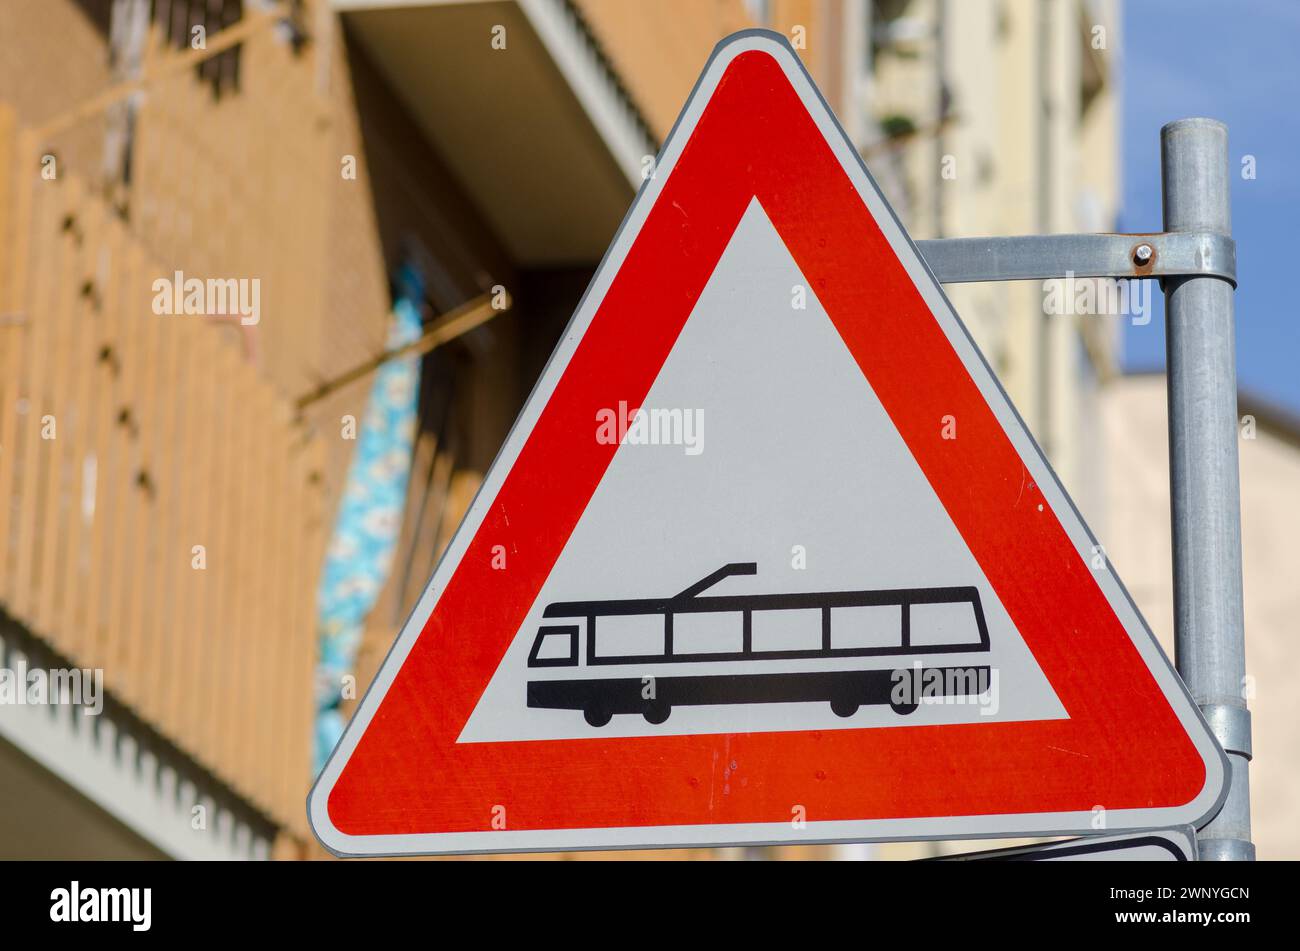 public transport tram, road signs, triangle, indicates medium passage such as light rail or tram, electrified on line with track, pay attention. Stock Photo